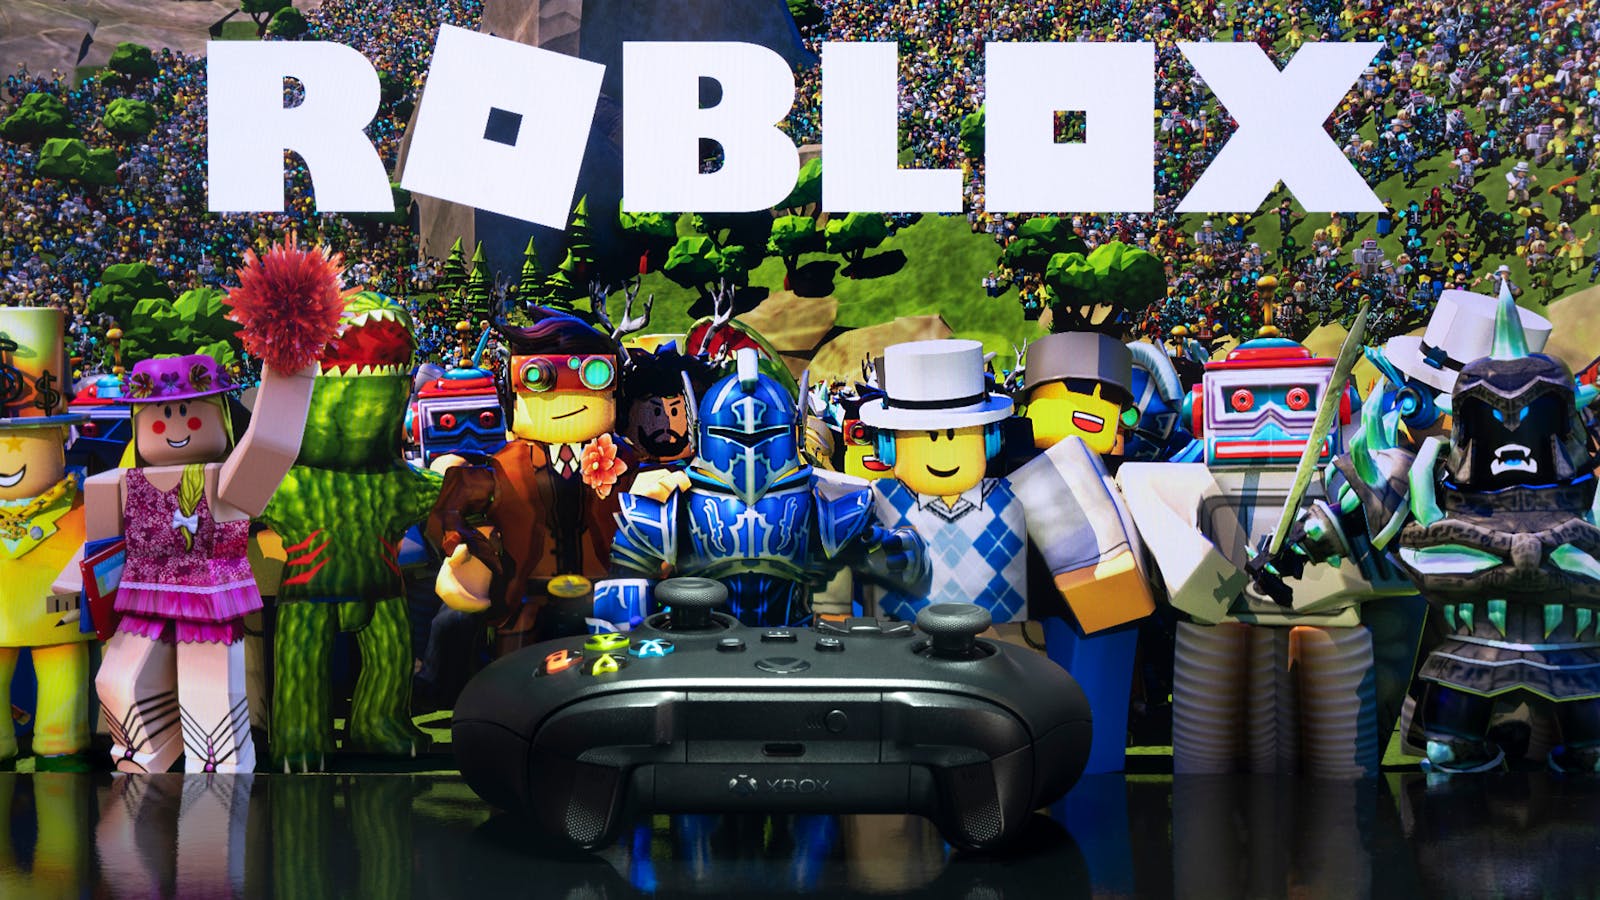 Roblox News: Roblox's New Site Update- Bad, or Good?